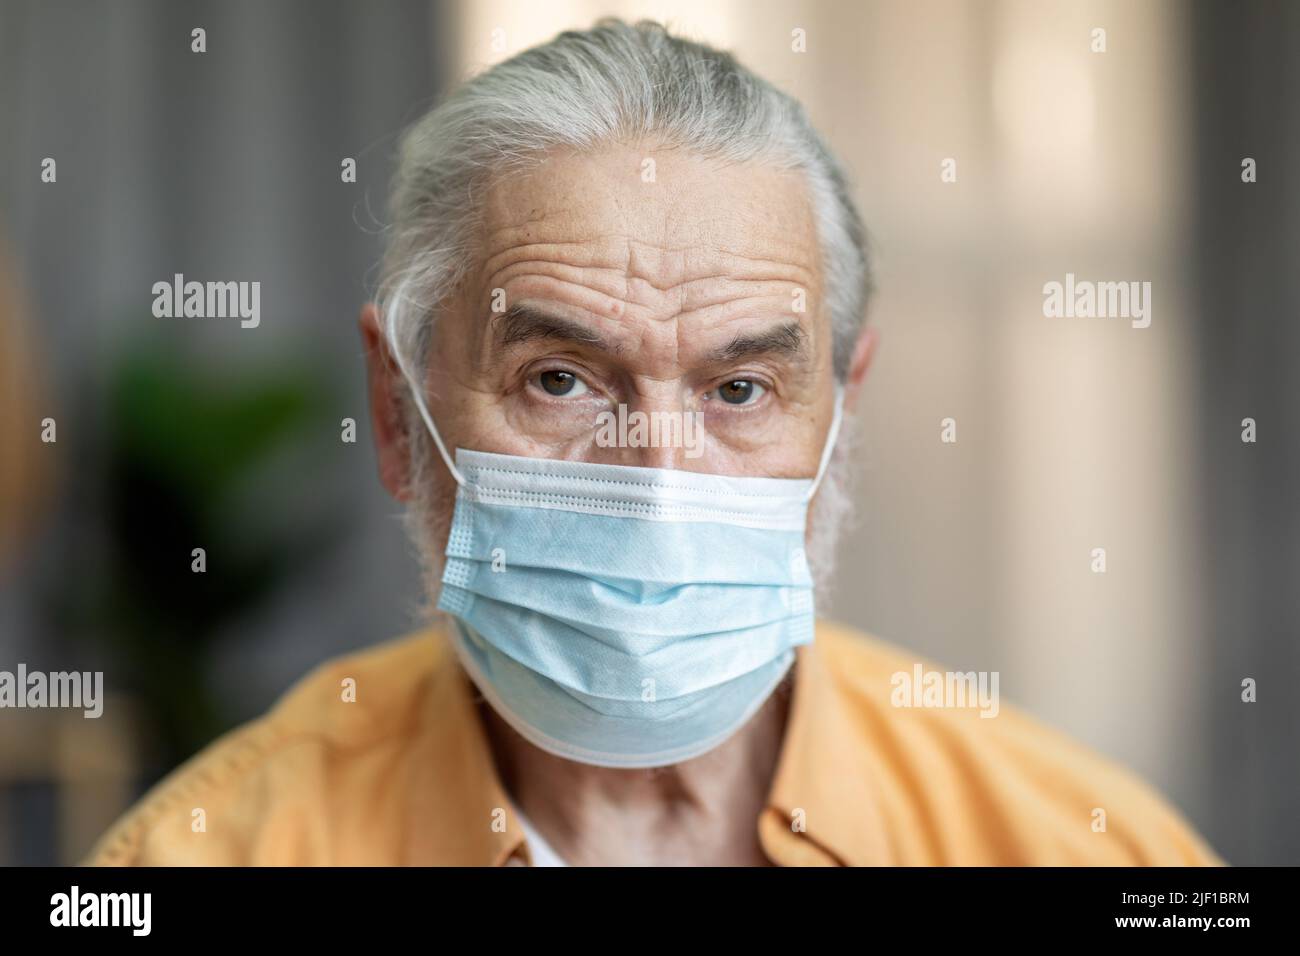 Portrait of an old man wearing a medical mask Stock Photo